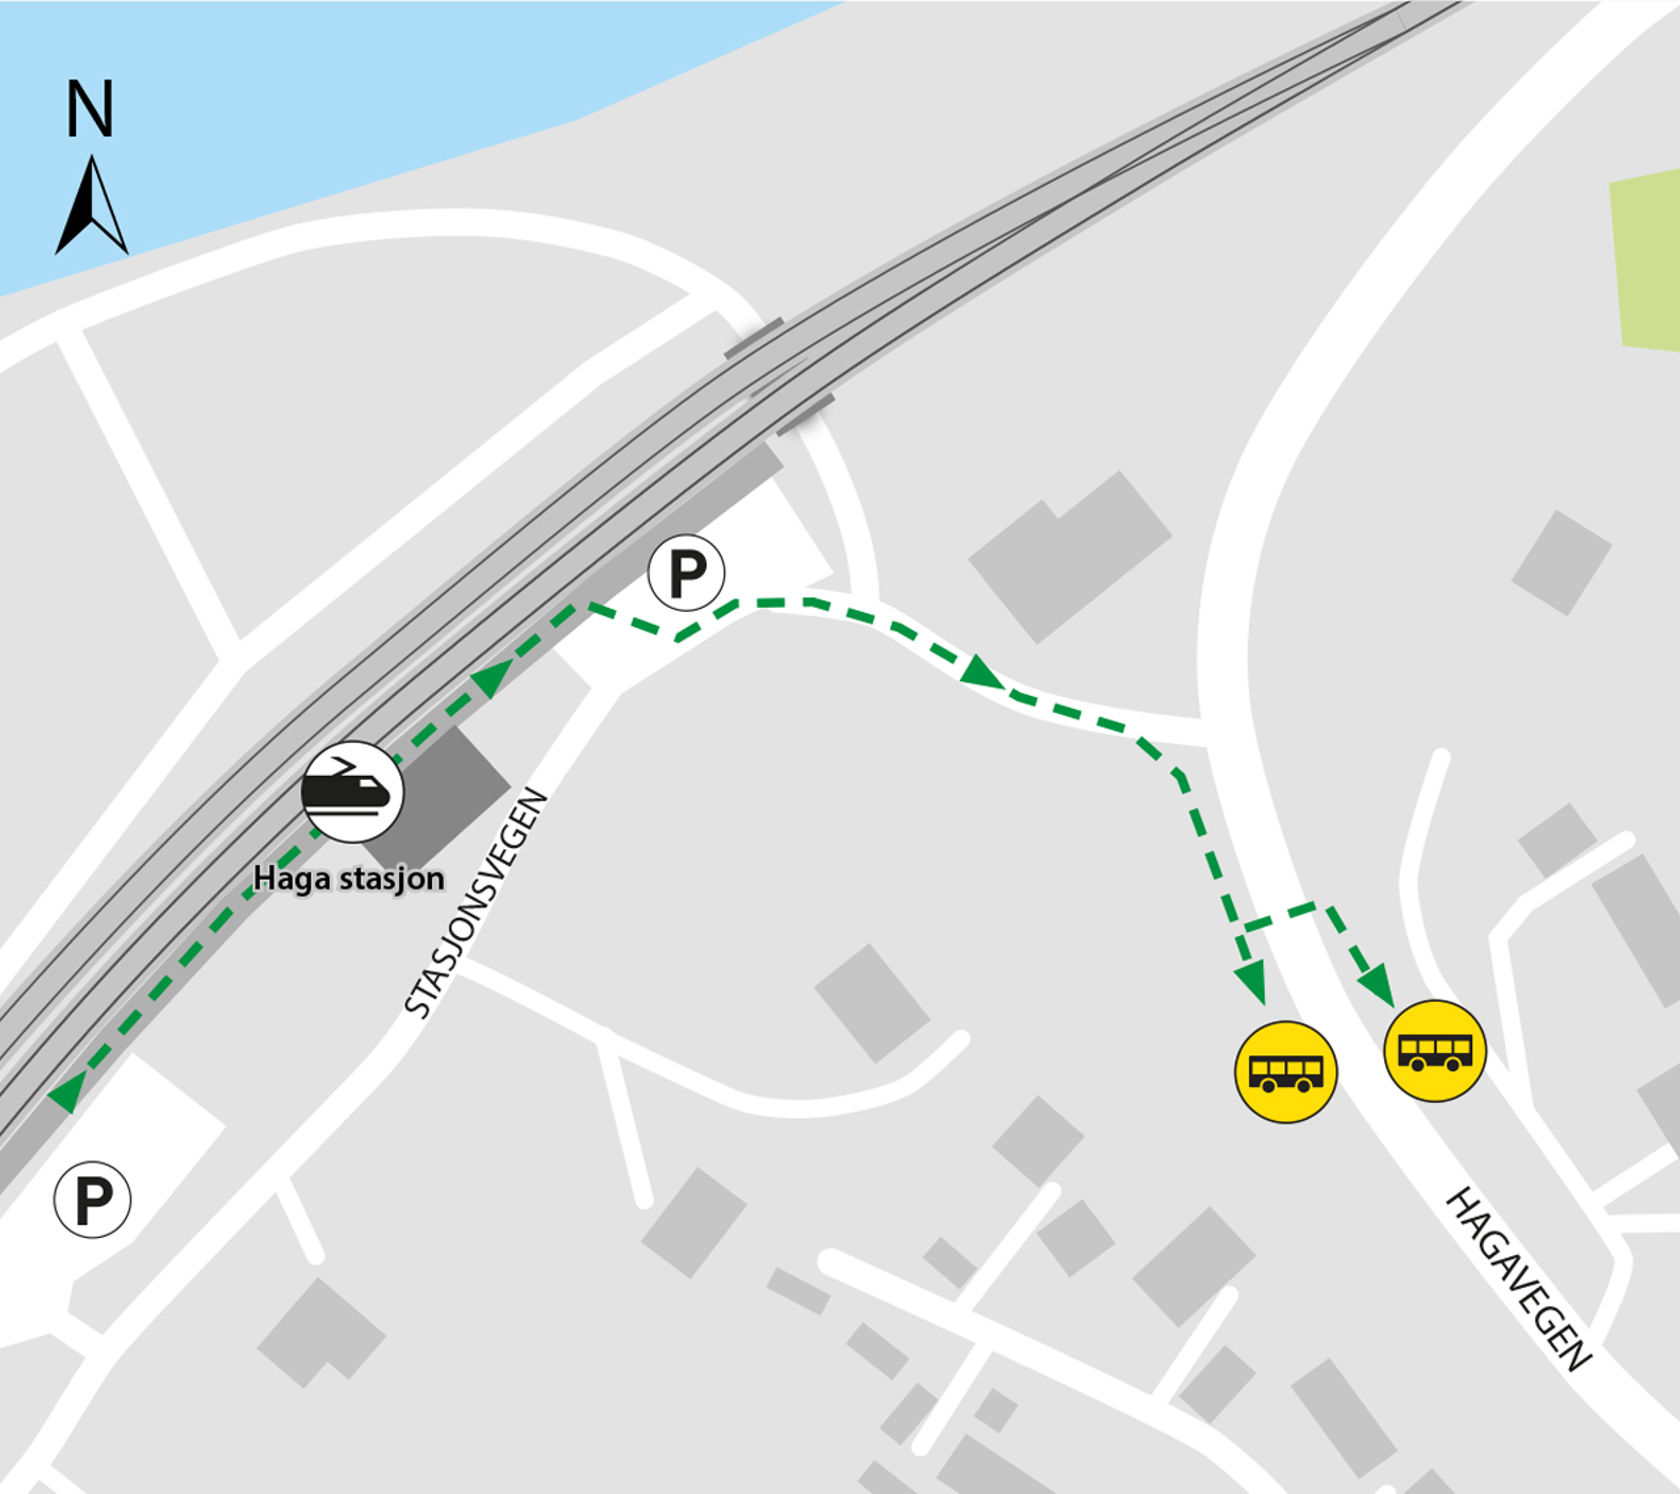 The map shows that the buses run from the Haga station bus stops.